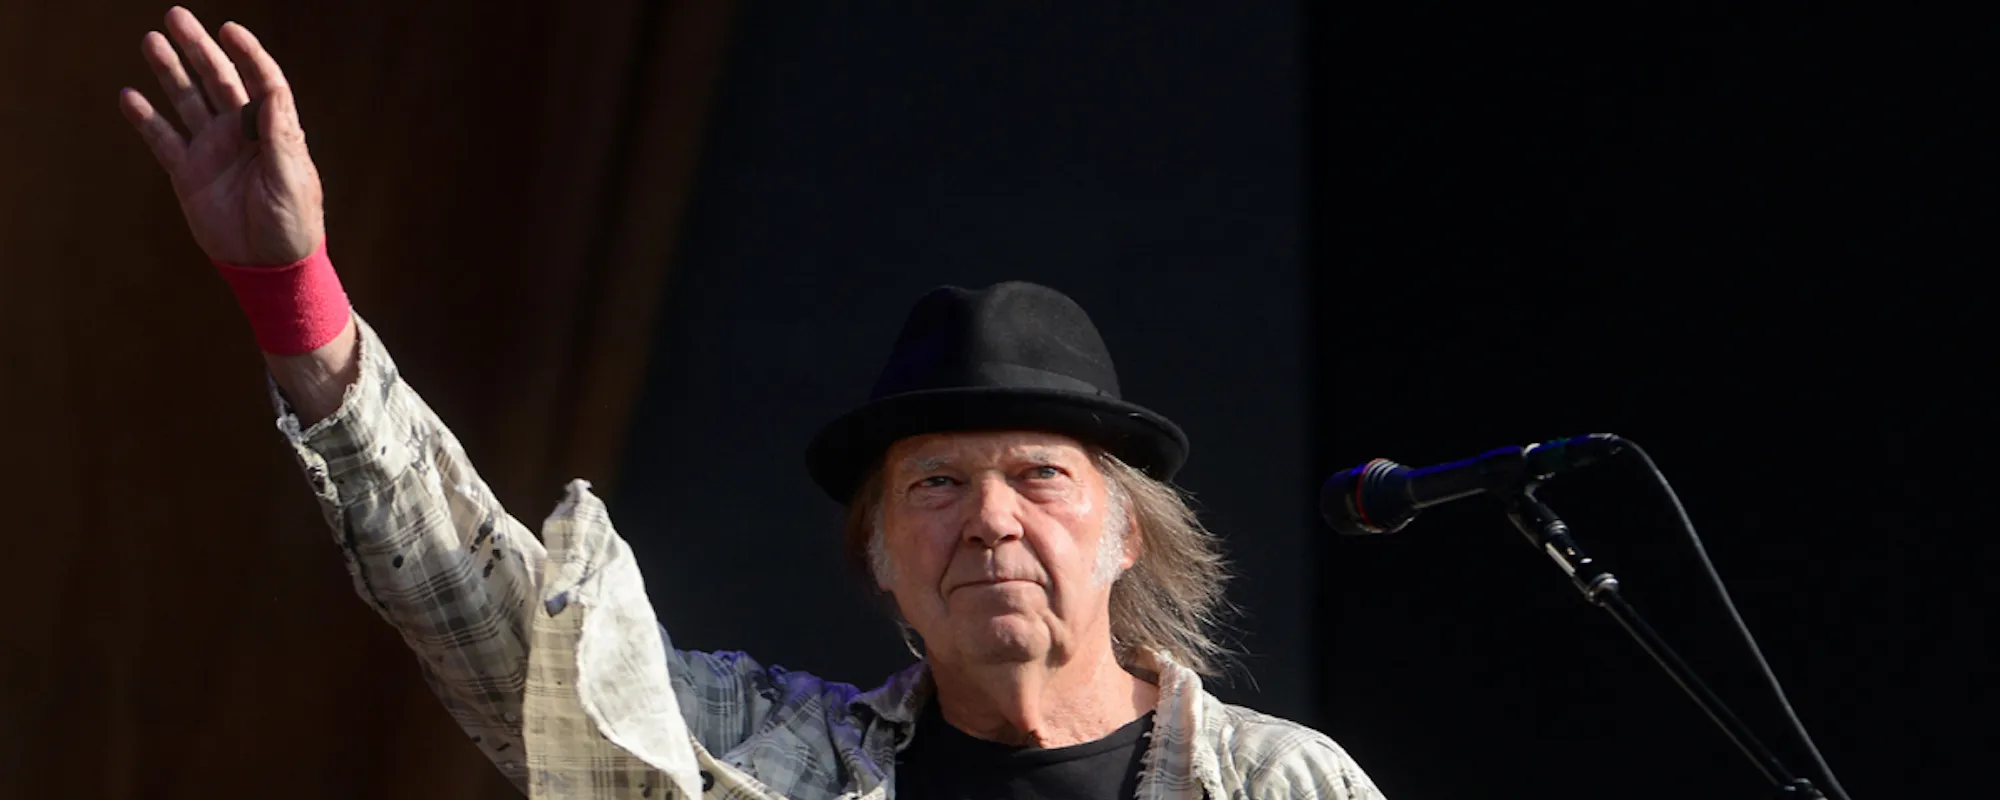 Neil Young’s 9 Greatest Hits